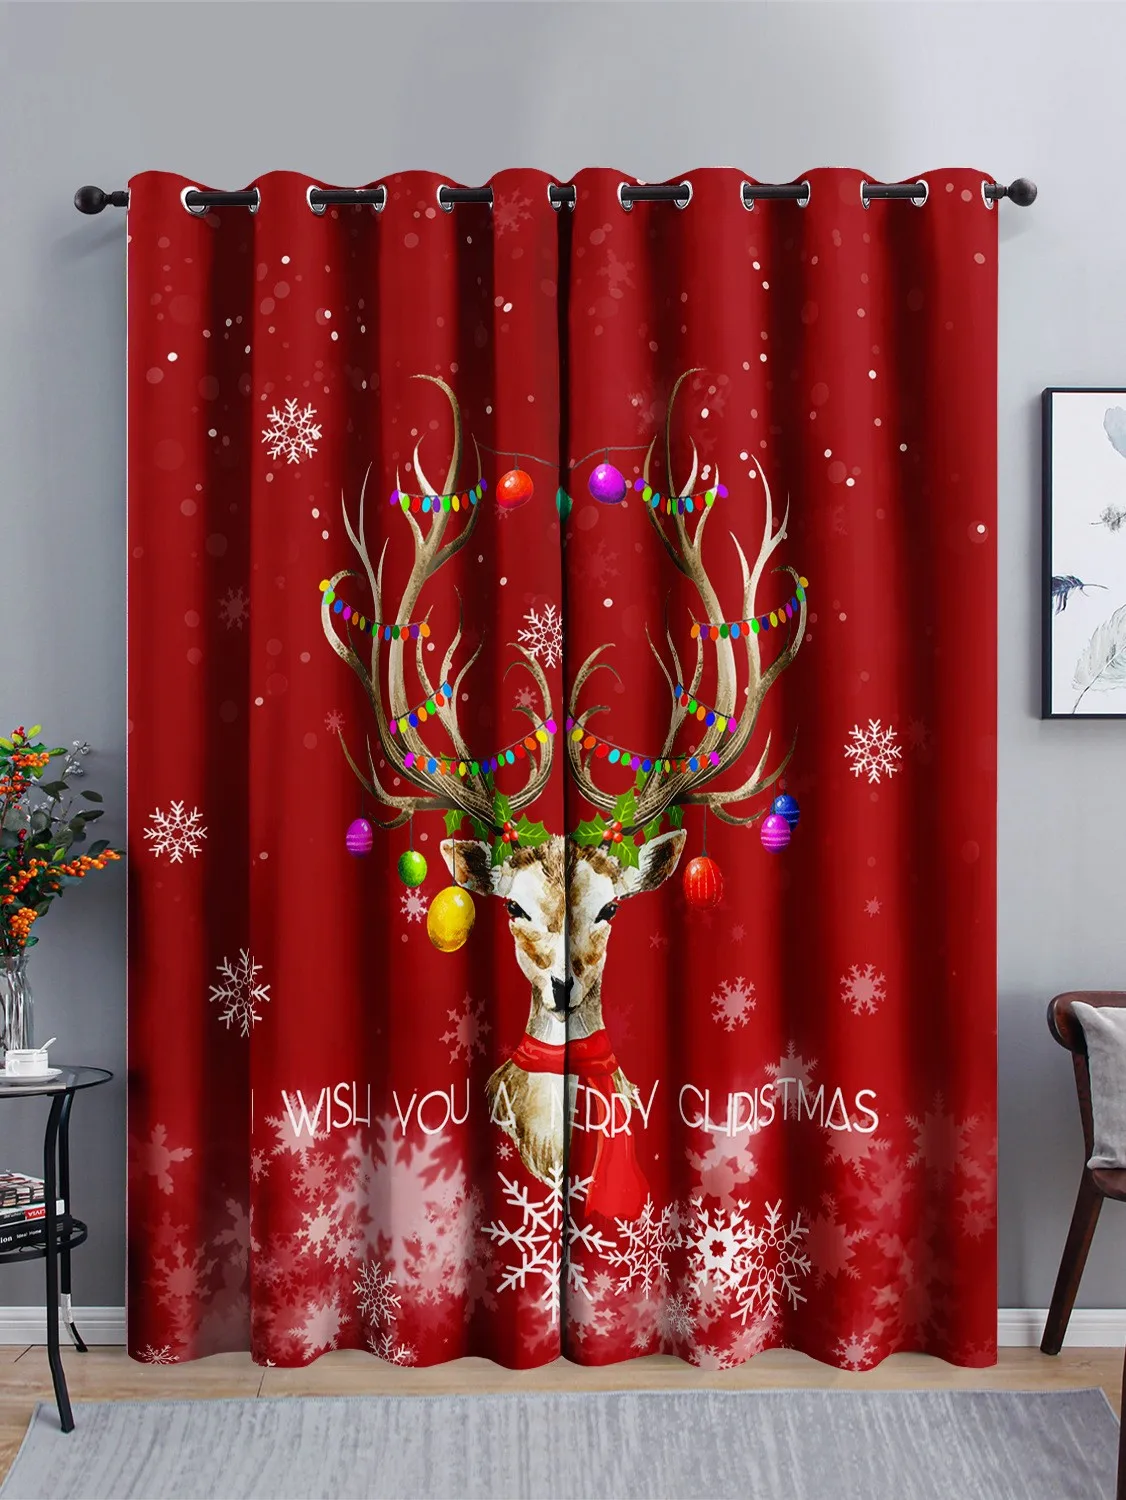 

Happy New Year Santa Claus Merry Christmas Reindeer Shading Darkening Curtain for Living Room Bedroom Kitchen Home Hook Decor